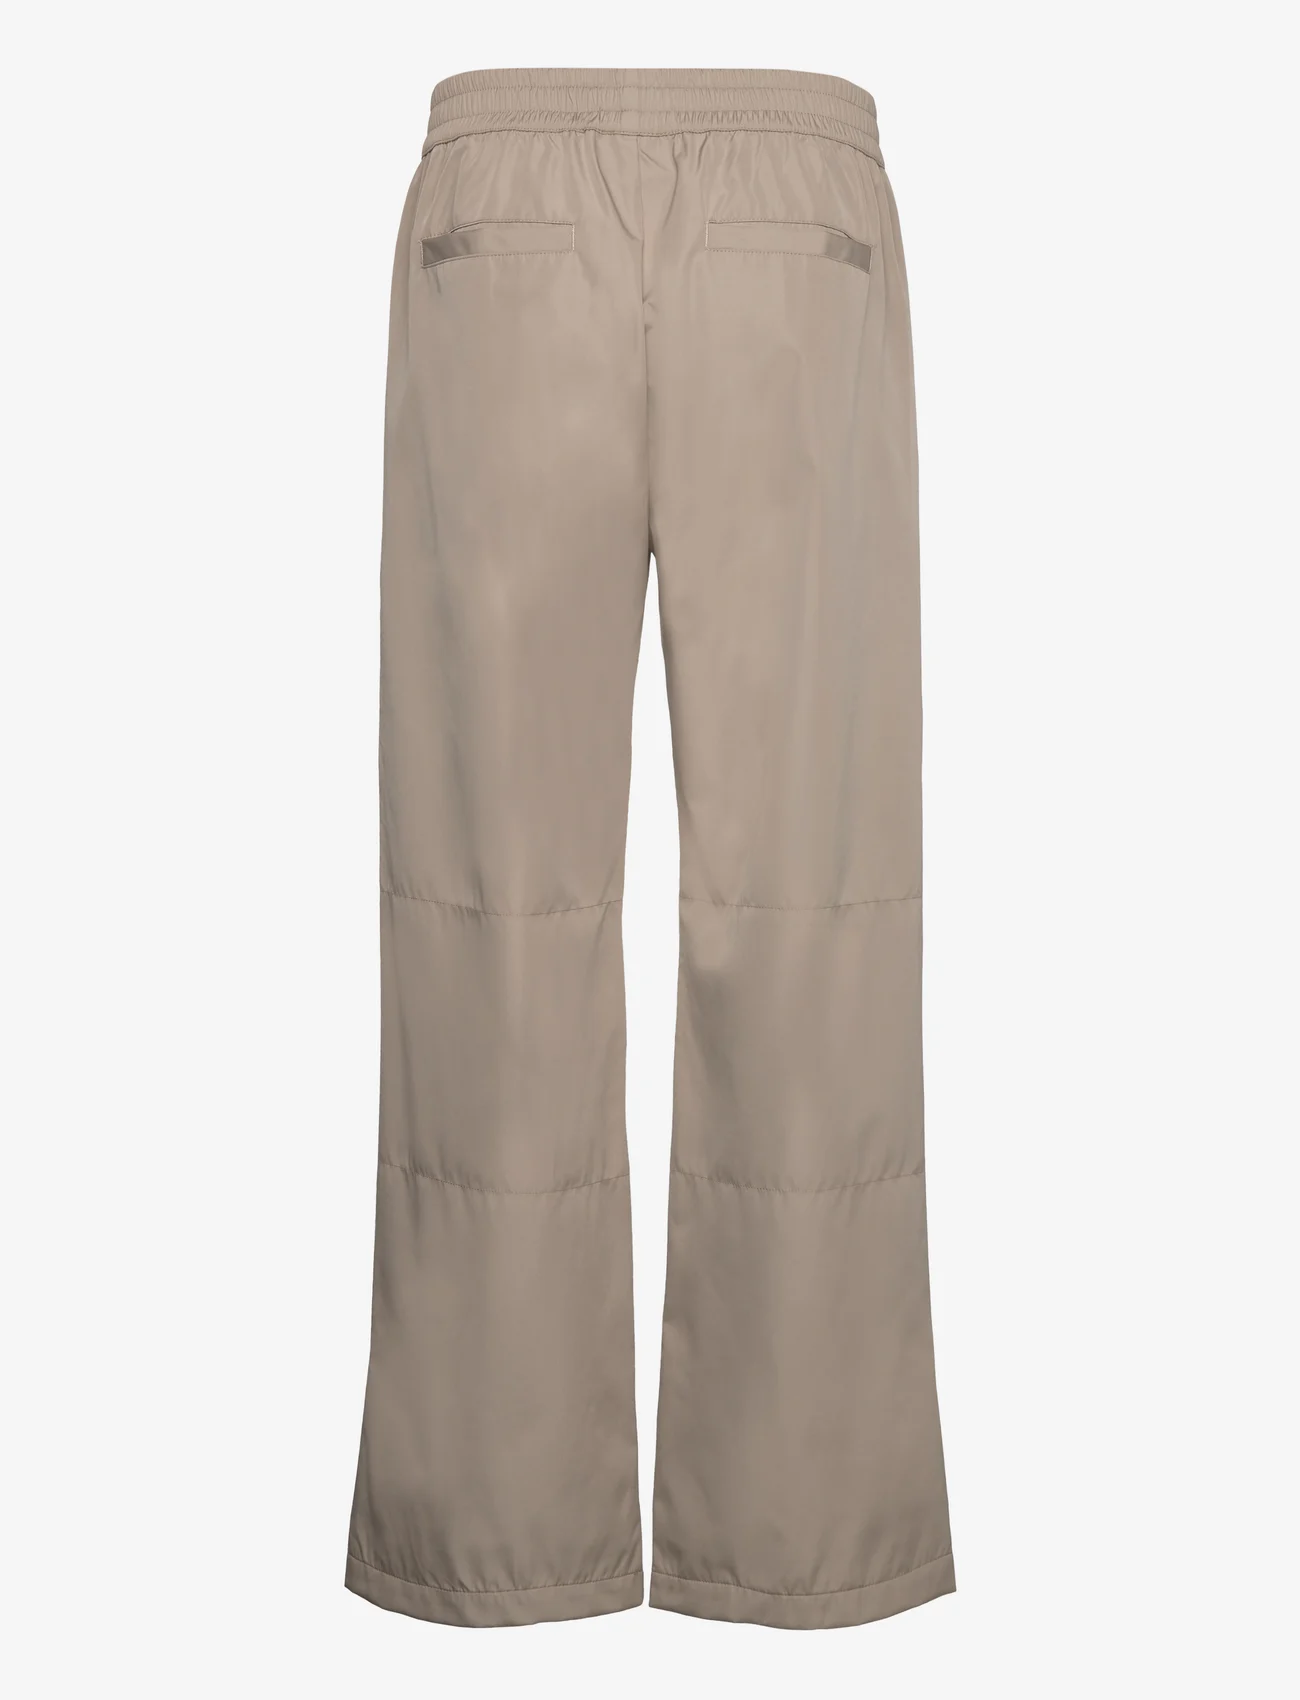 Roots by Han Kjøbenhavn - Relaxed Track Trousers - casual - sand - 1